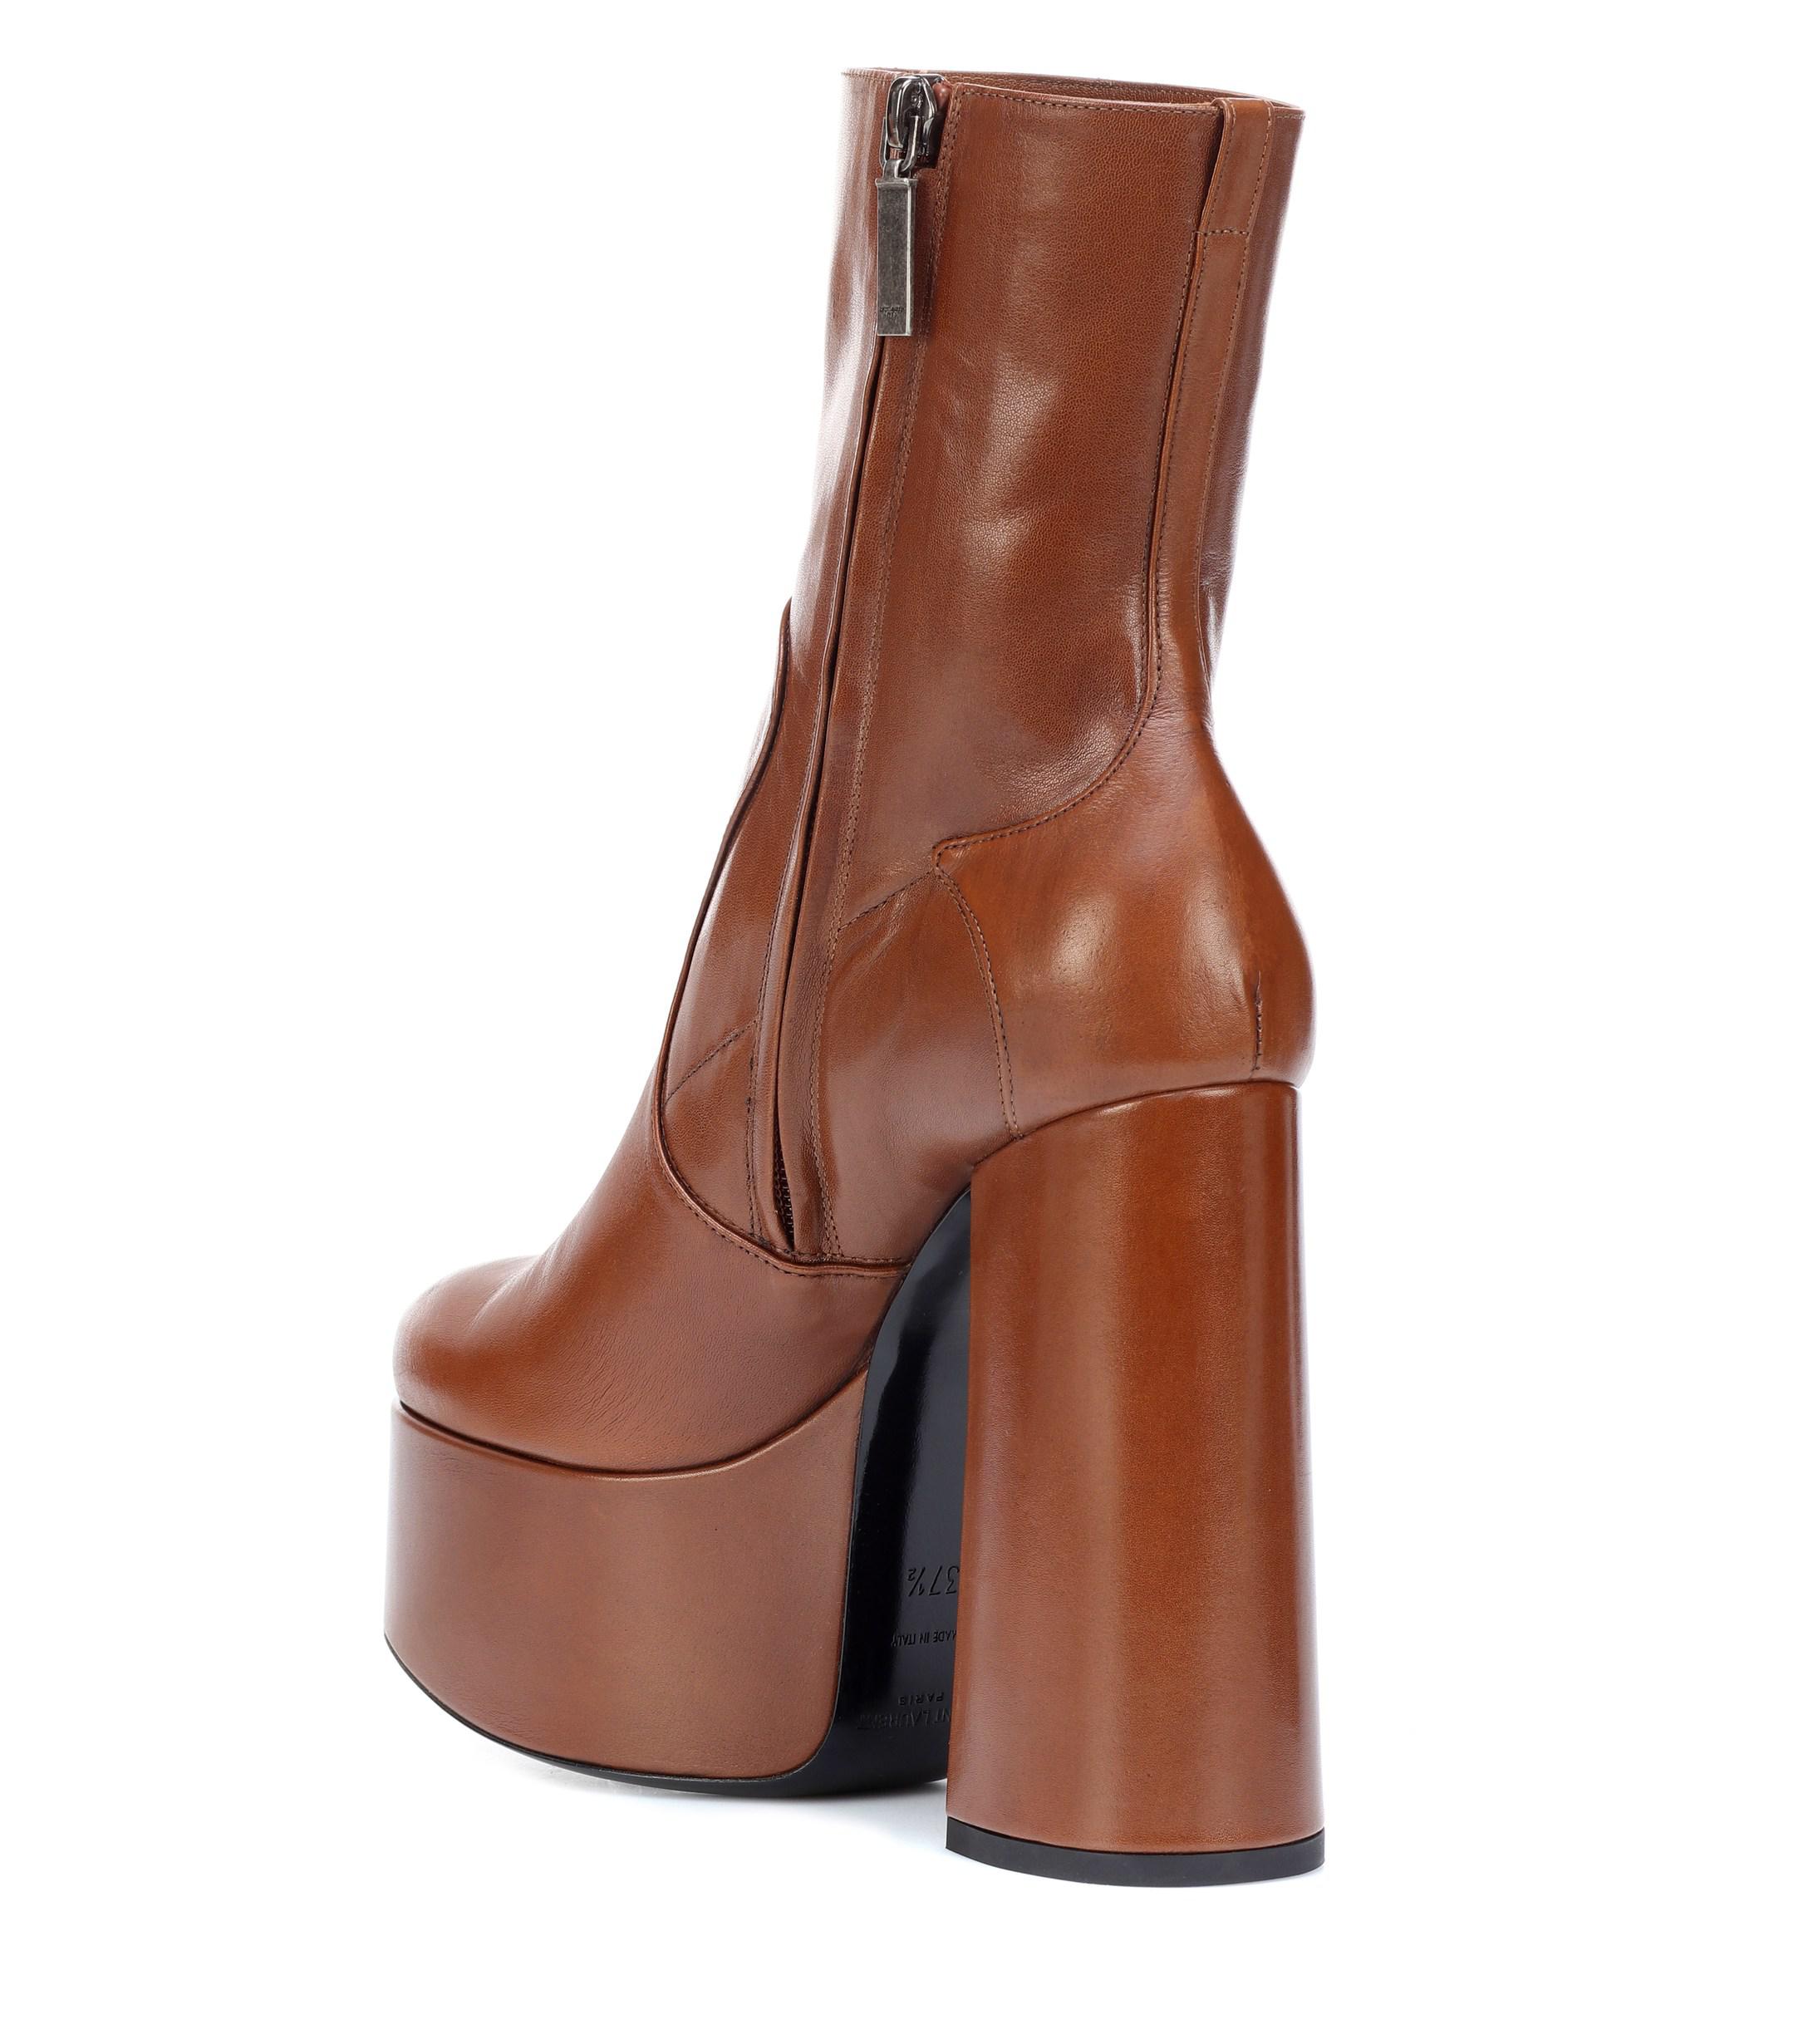 Saint Laurent Billy 140 Leather Ankle Boots in Brown - Lyst